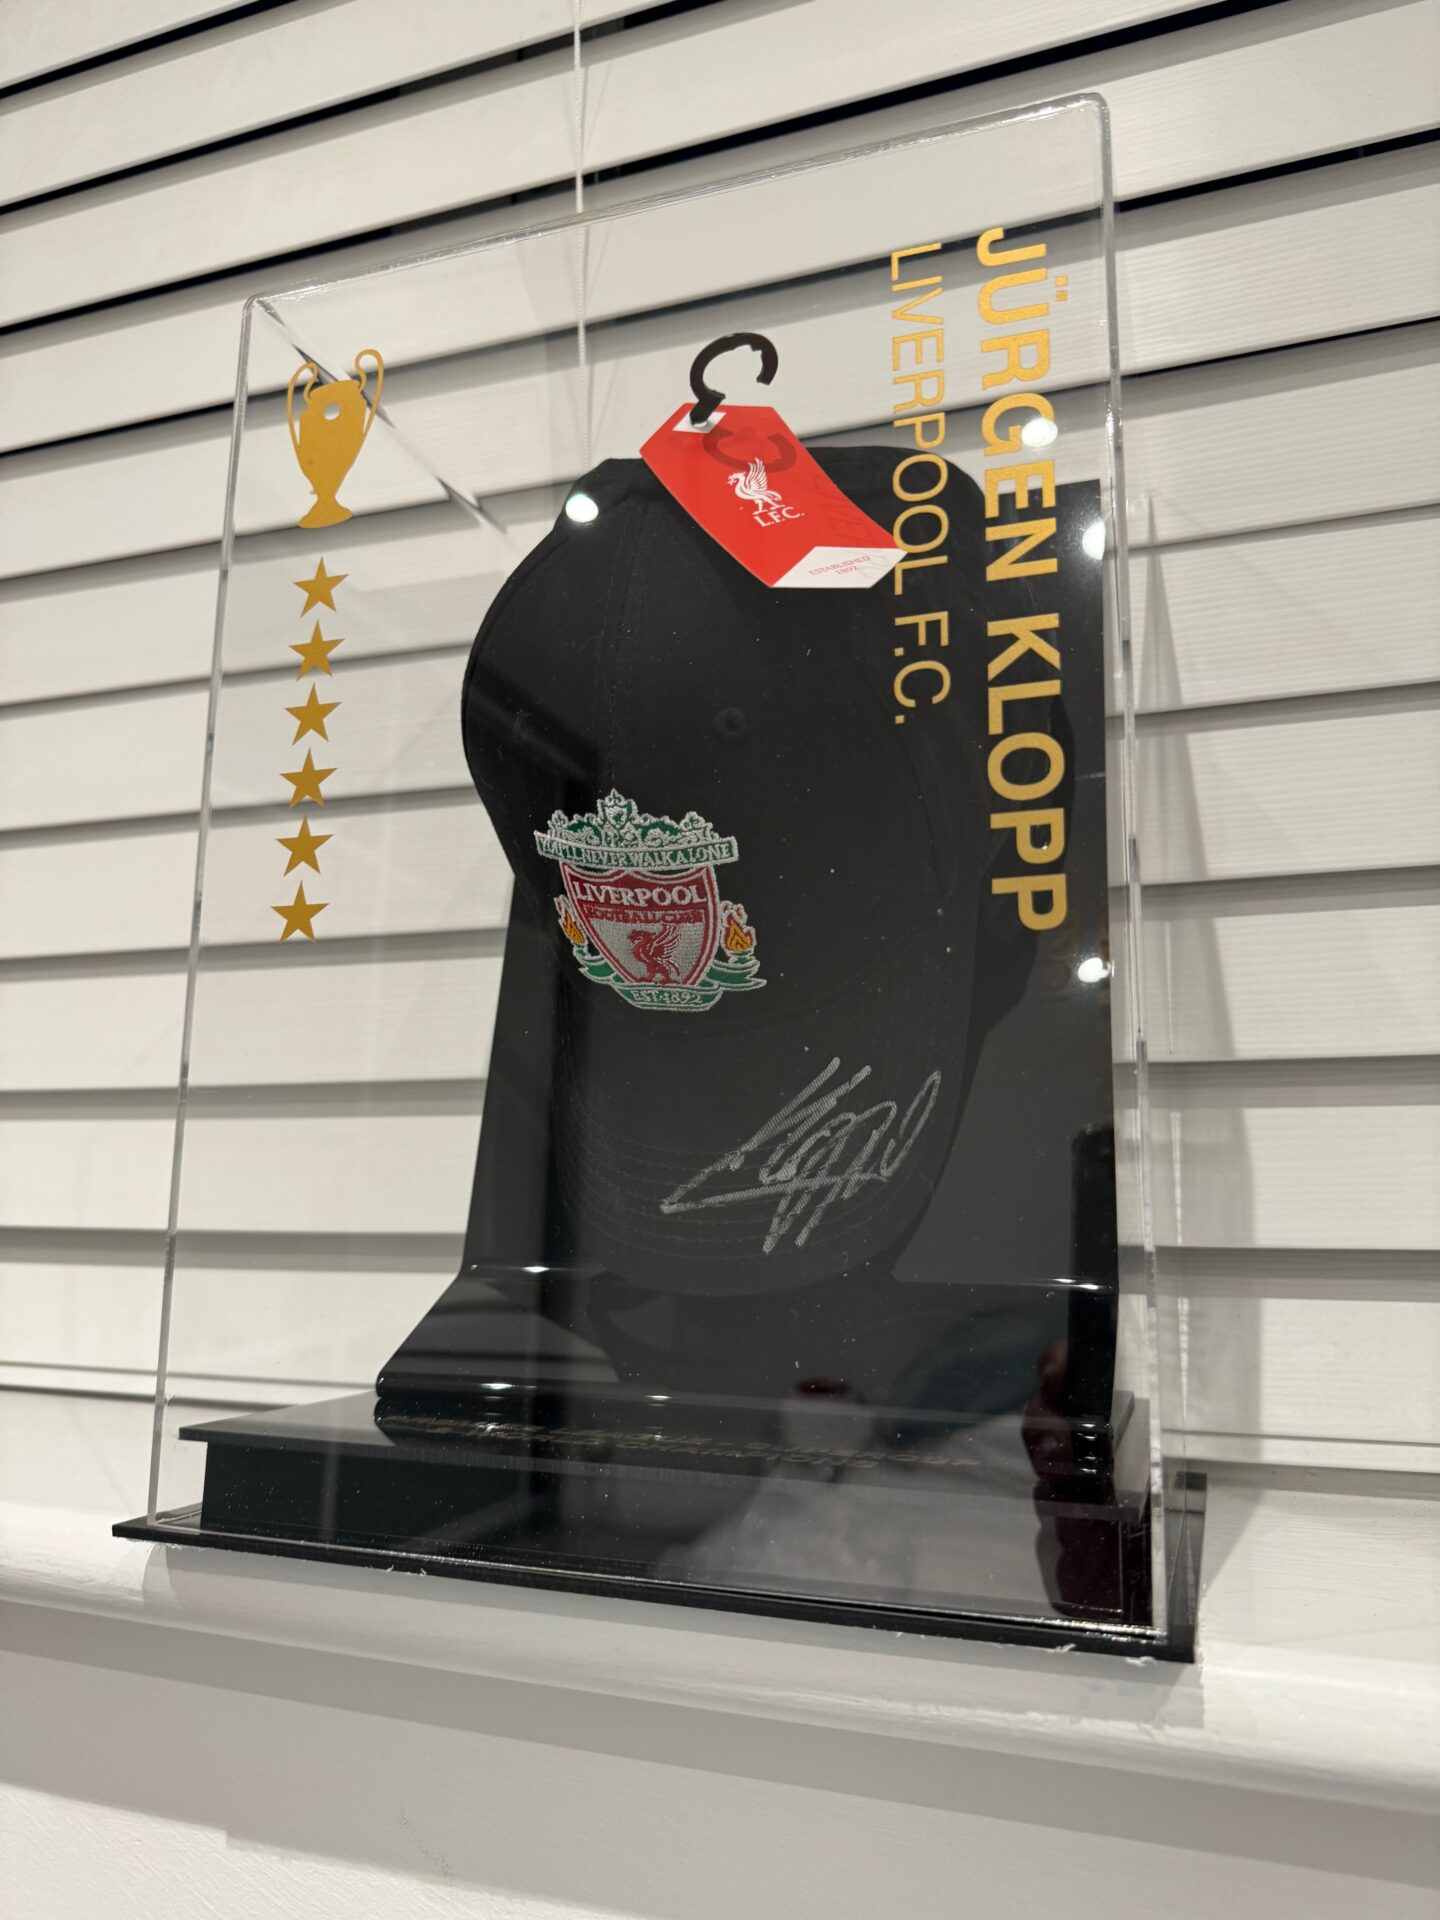 Red Liverpool Cap Personally Signed by Jurgen Klopp in Display Case